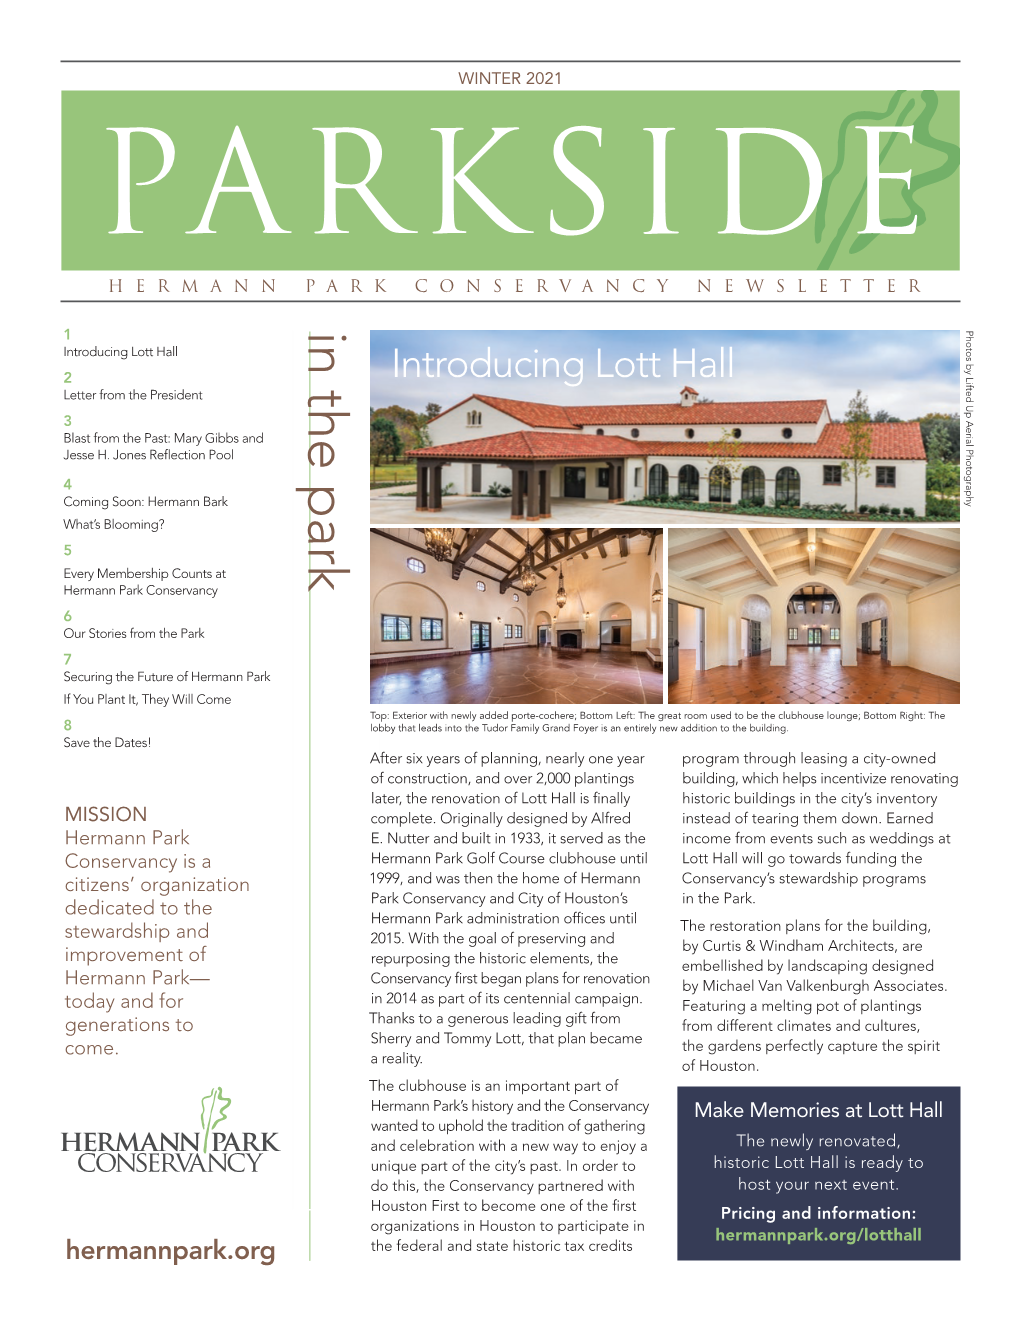 WINTER 2021 PARKSIDE HERMANN PARK CONSERVANCY NEWSLETTER Photos by Lifted up Aerial Photography in the Park in the 1 Introducing Lott Hall